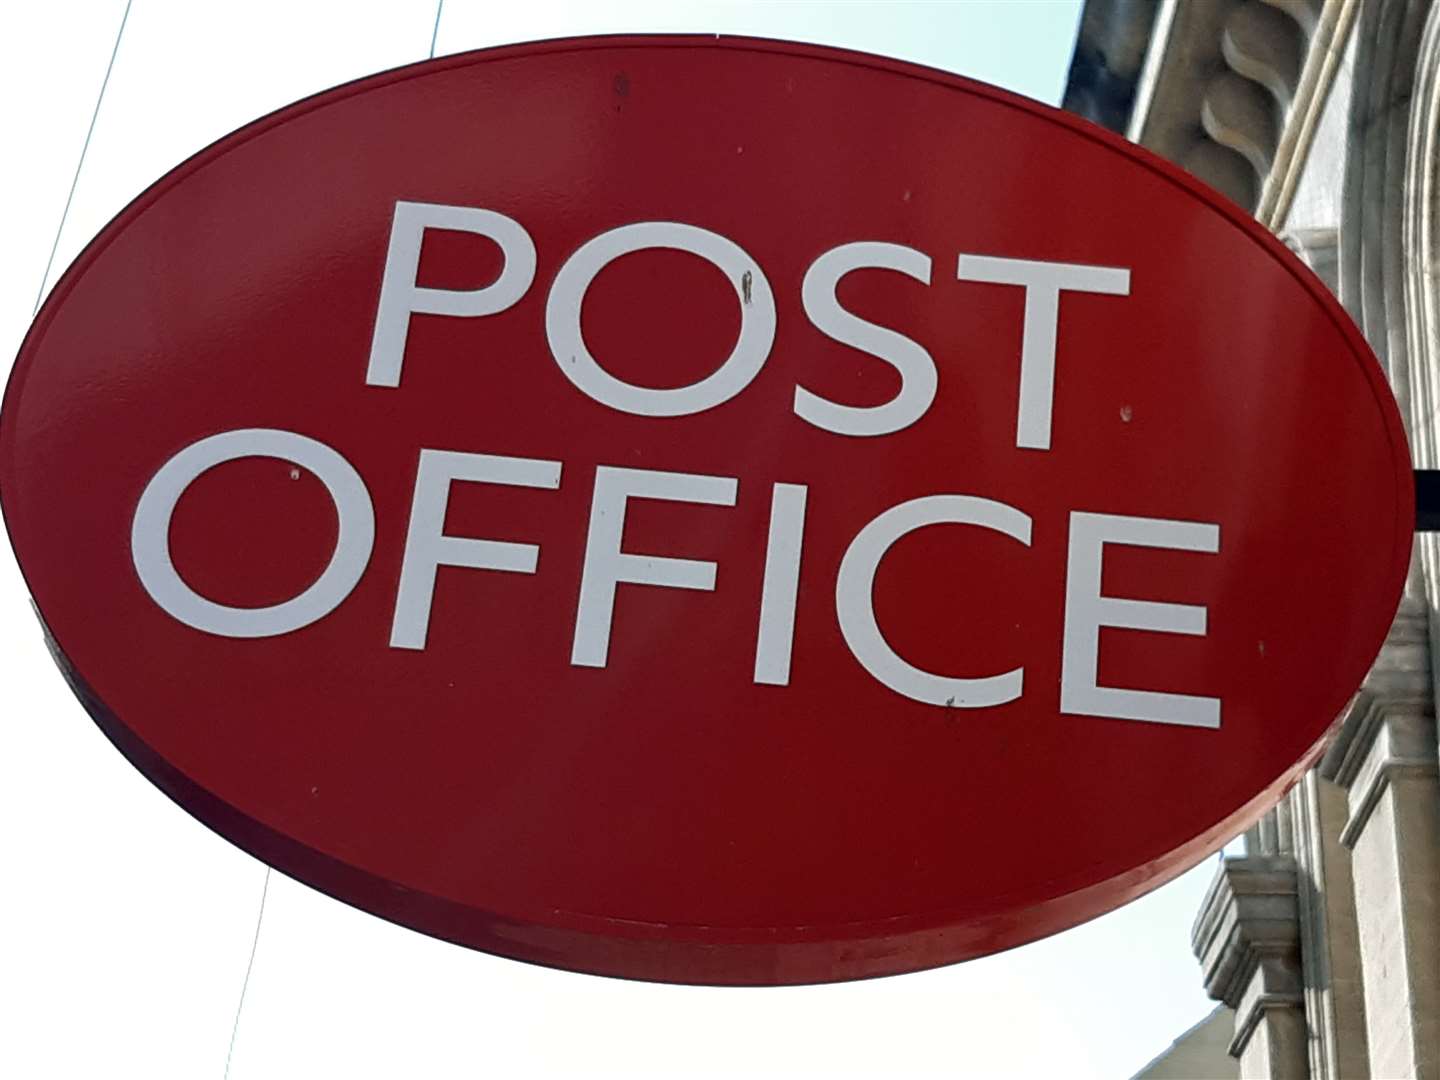 HMRC will no longer pay tax credit and child benefit payments into Post Office card accounts after April 5